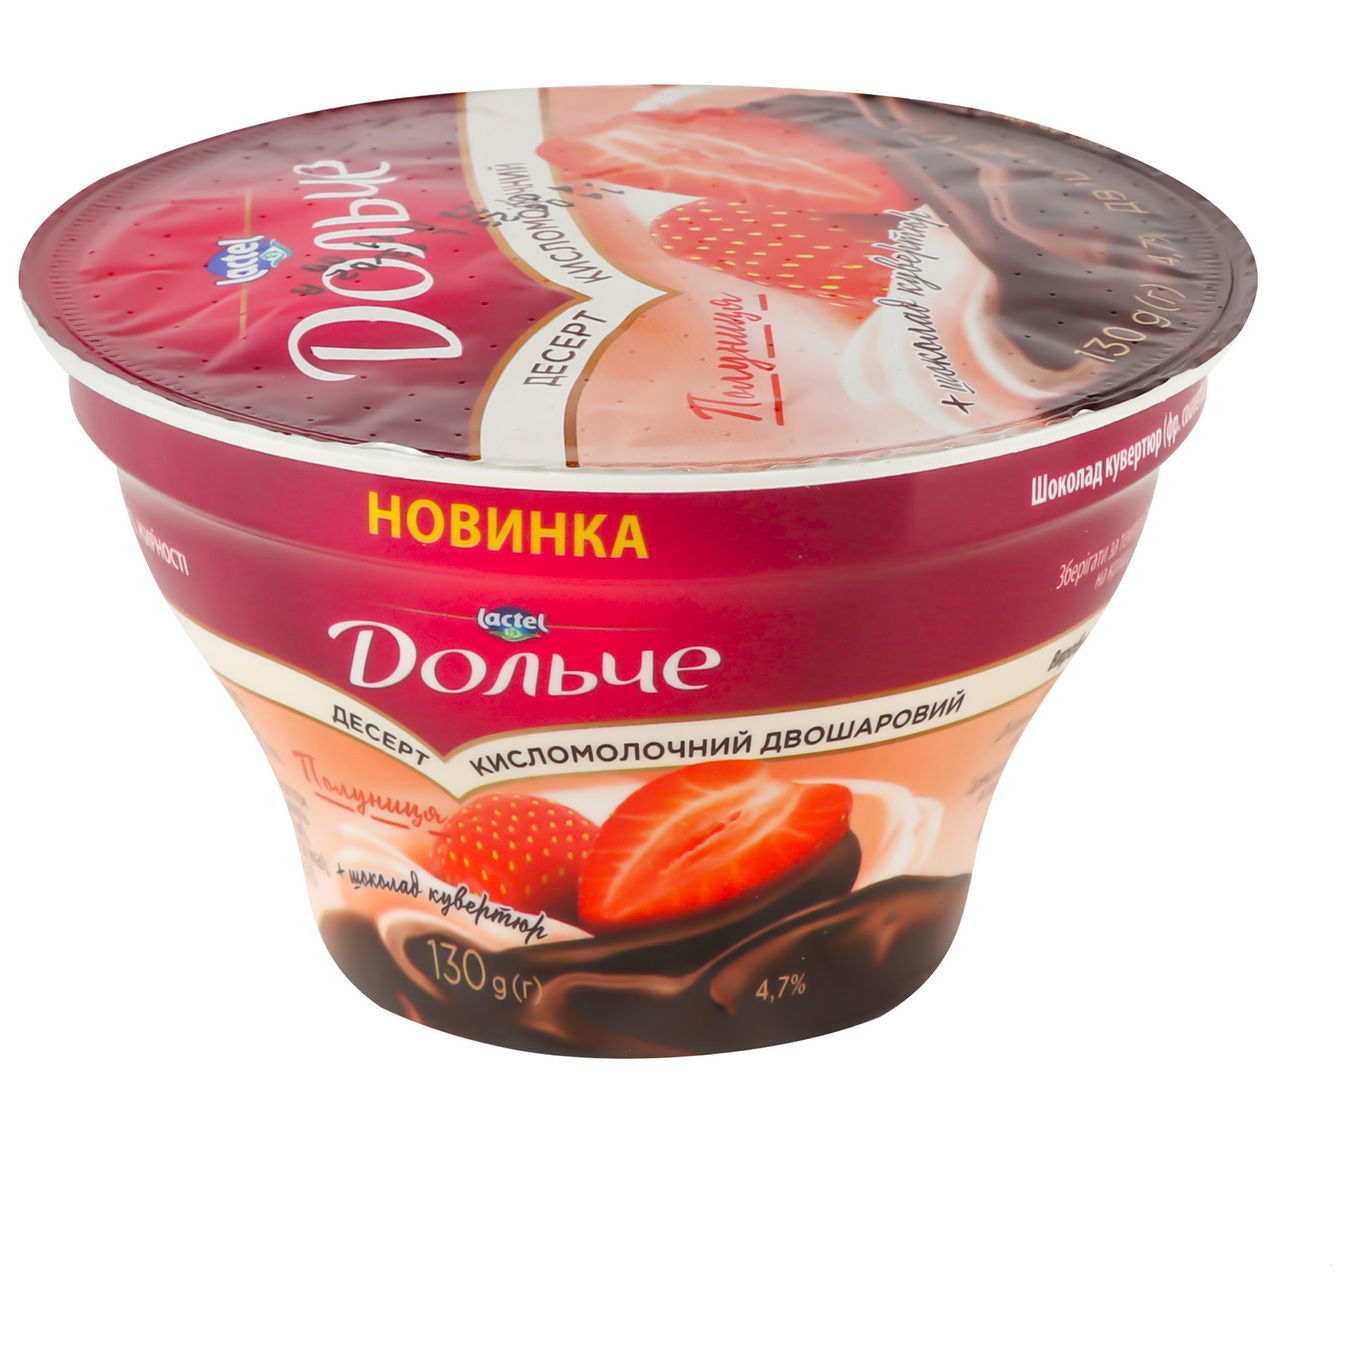 Dolce dessert with chocolate couverture and strawberry fillings cup 4.7% 130g 2